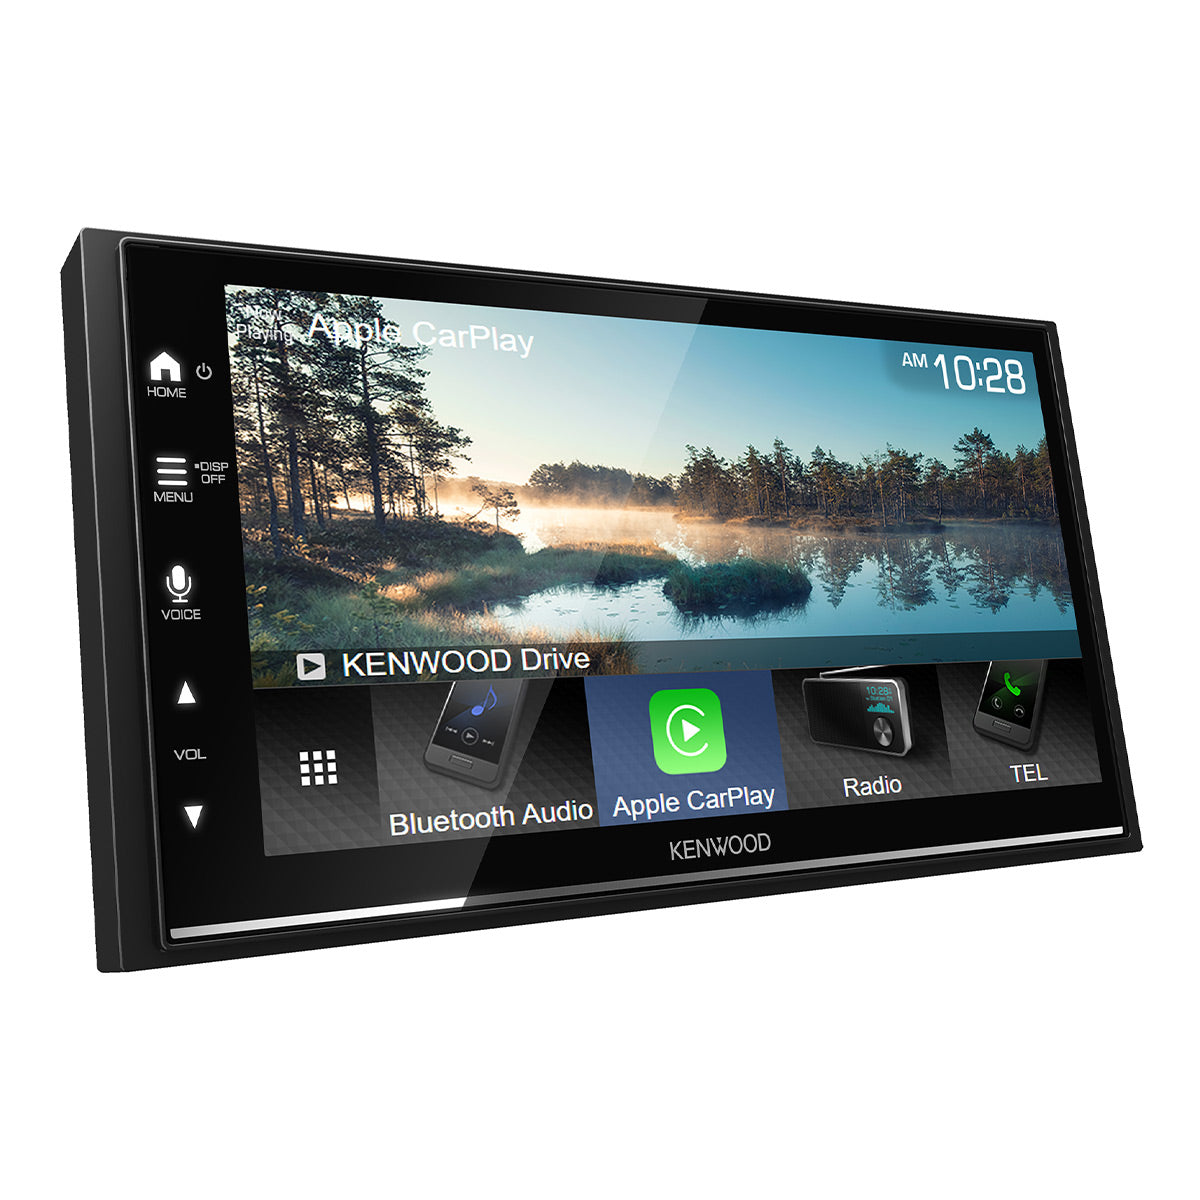 Kenwood DMX7709S 6.8" Digital Multimedia Bluetooth Receiver with Capacitive Touchscreen, Apple CarPlay, and Android Auto